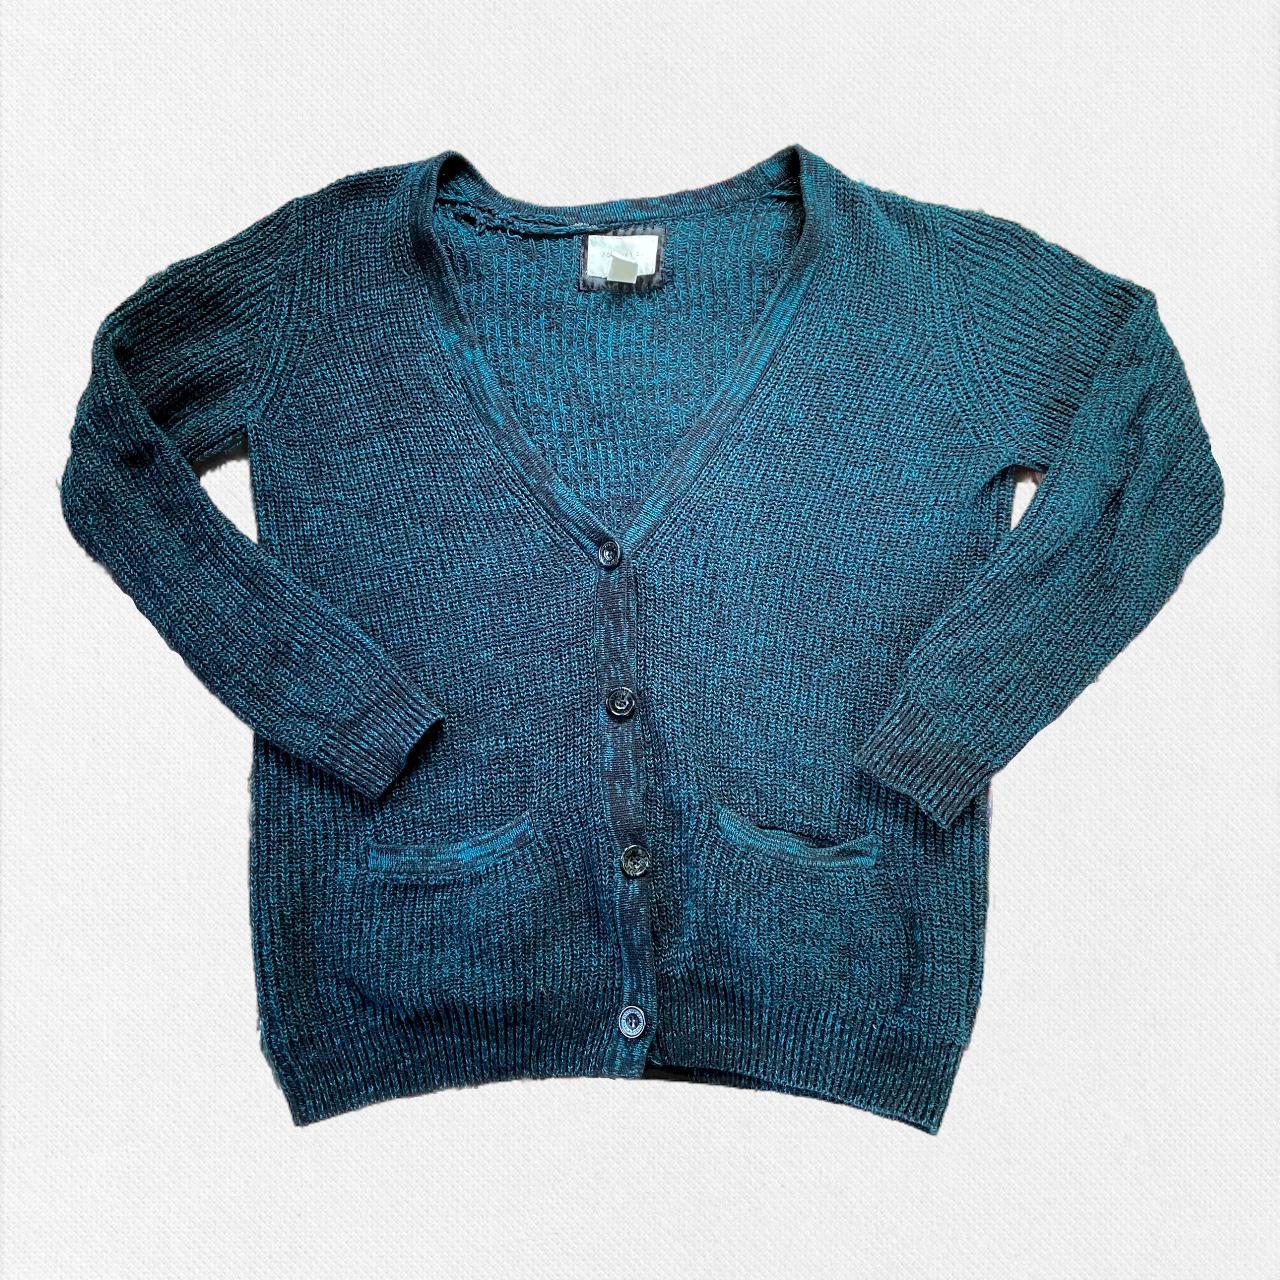 Product Image 1 - black and teal knit grandpa